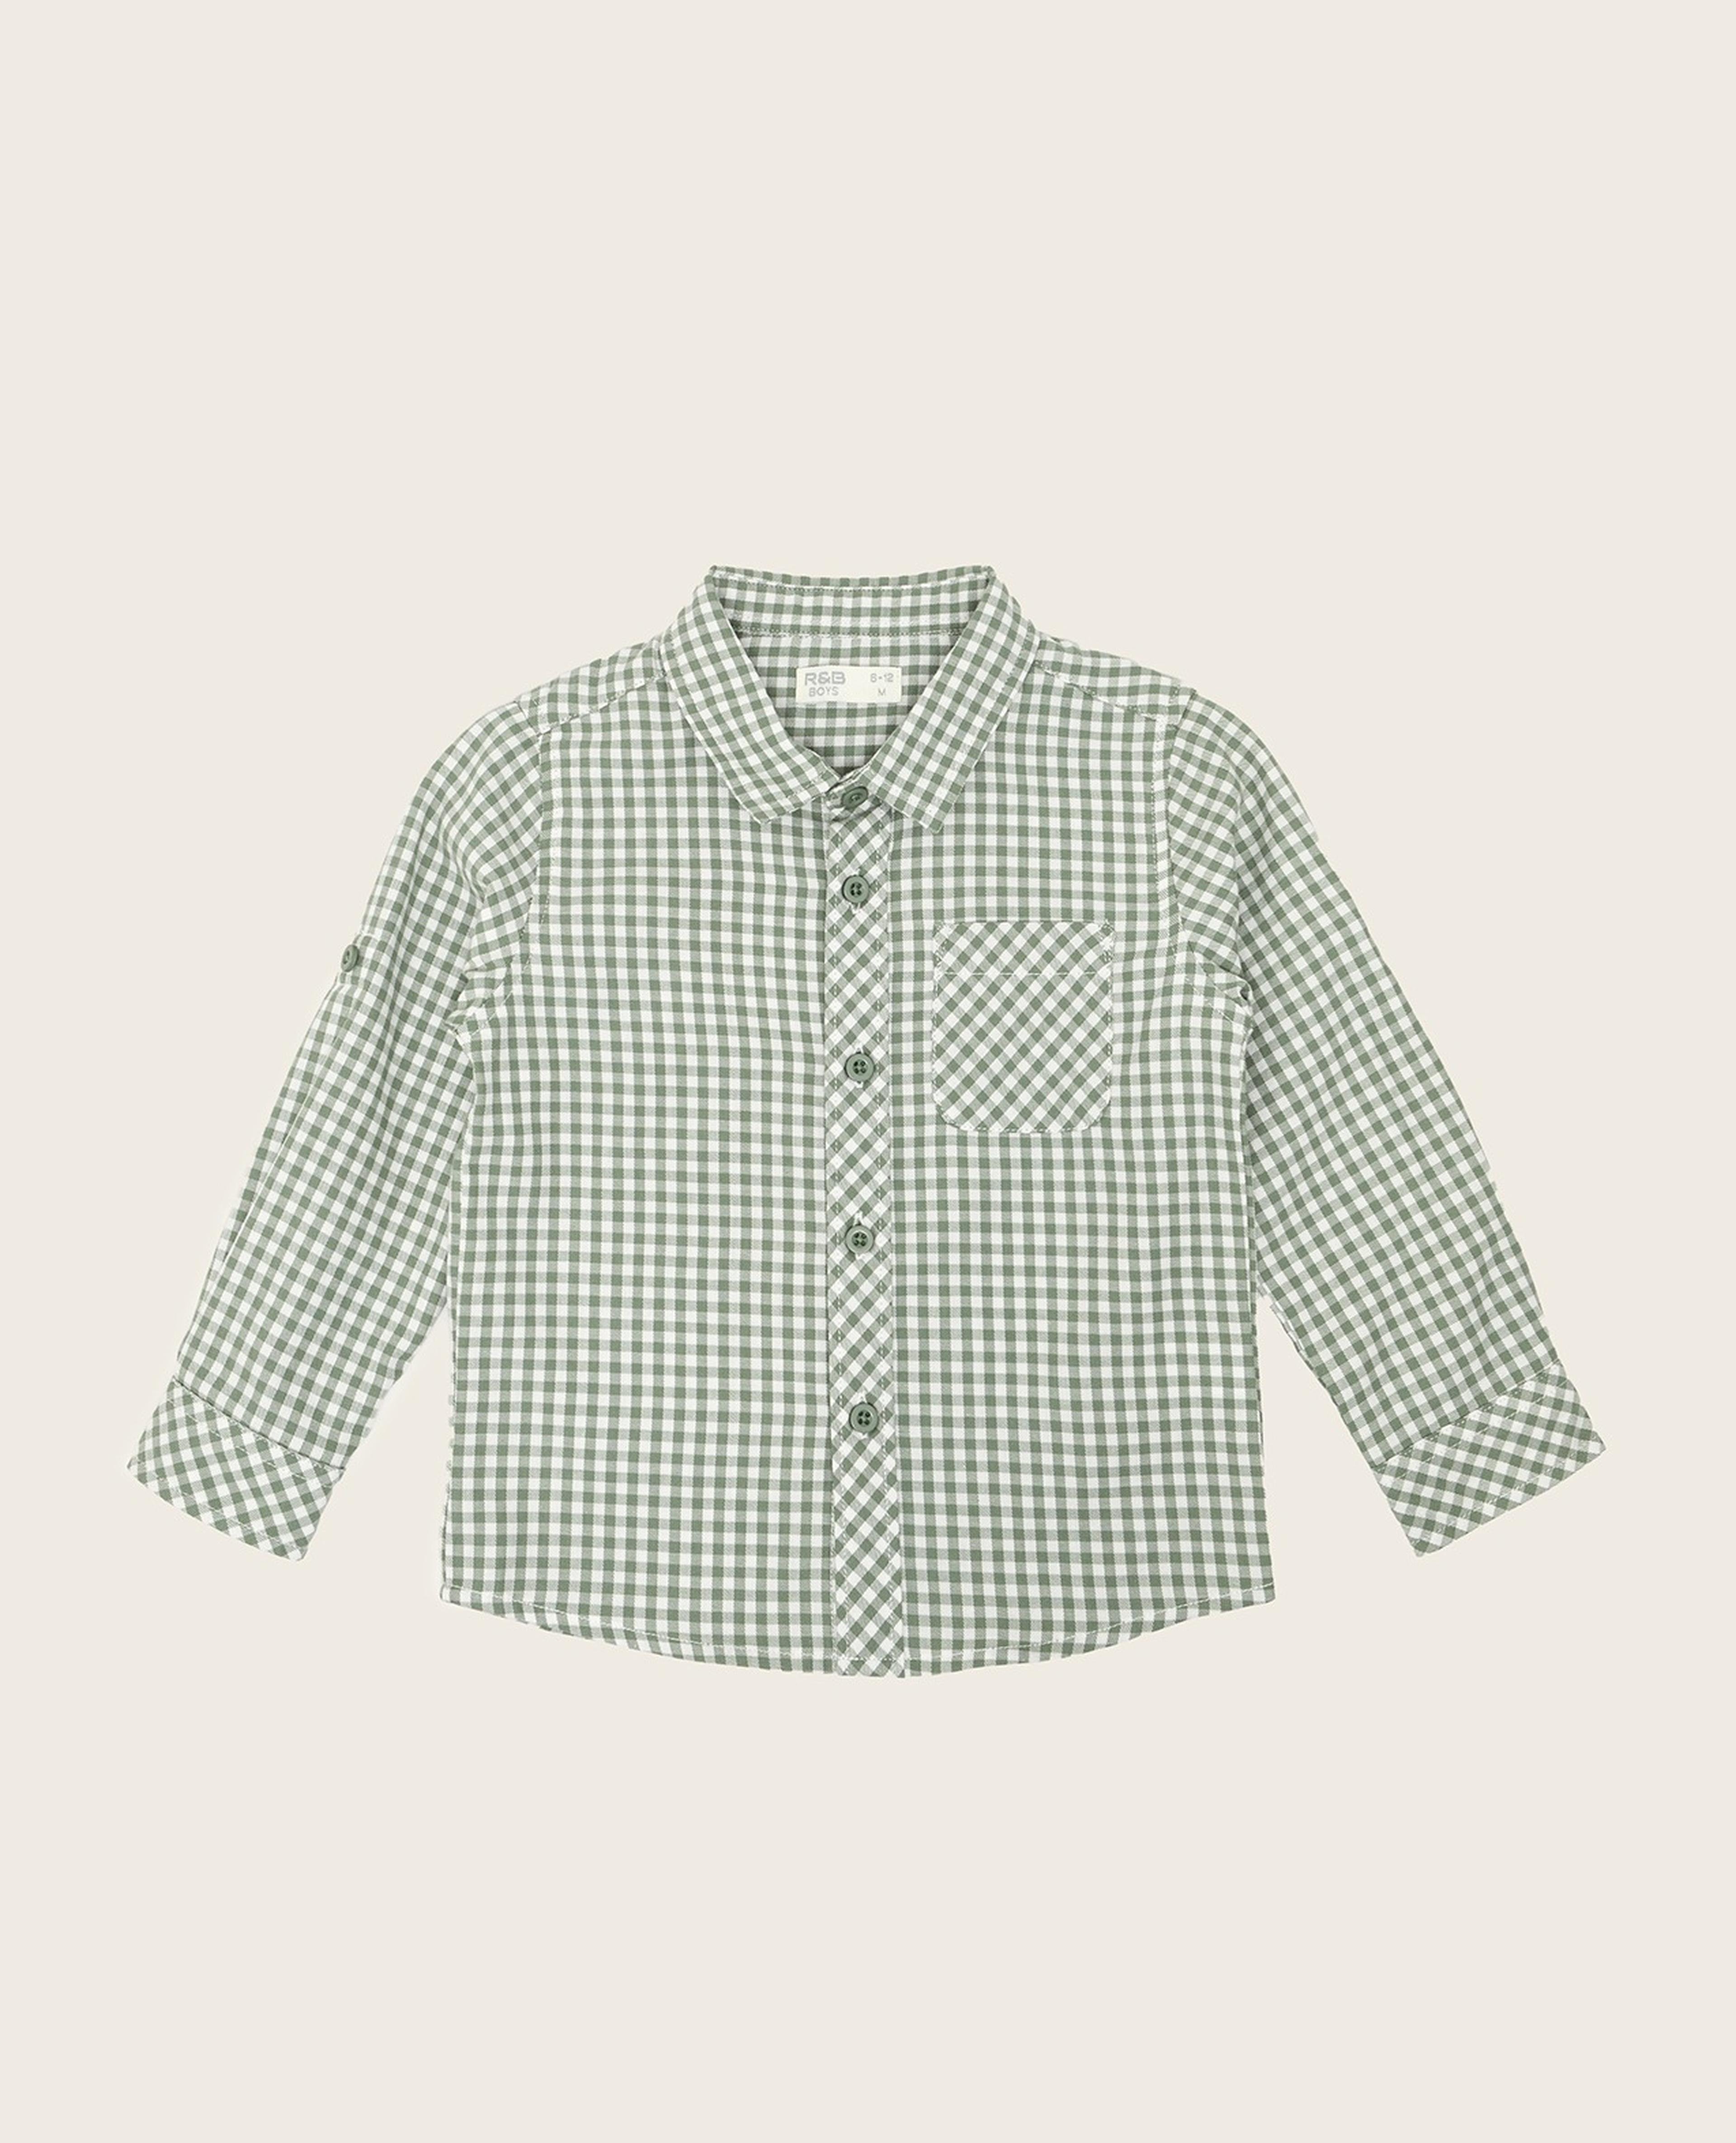 Checkered Shirt with Classic Collar and Long Sleeves